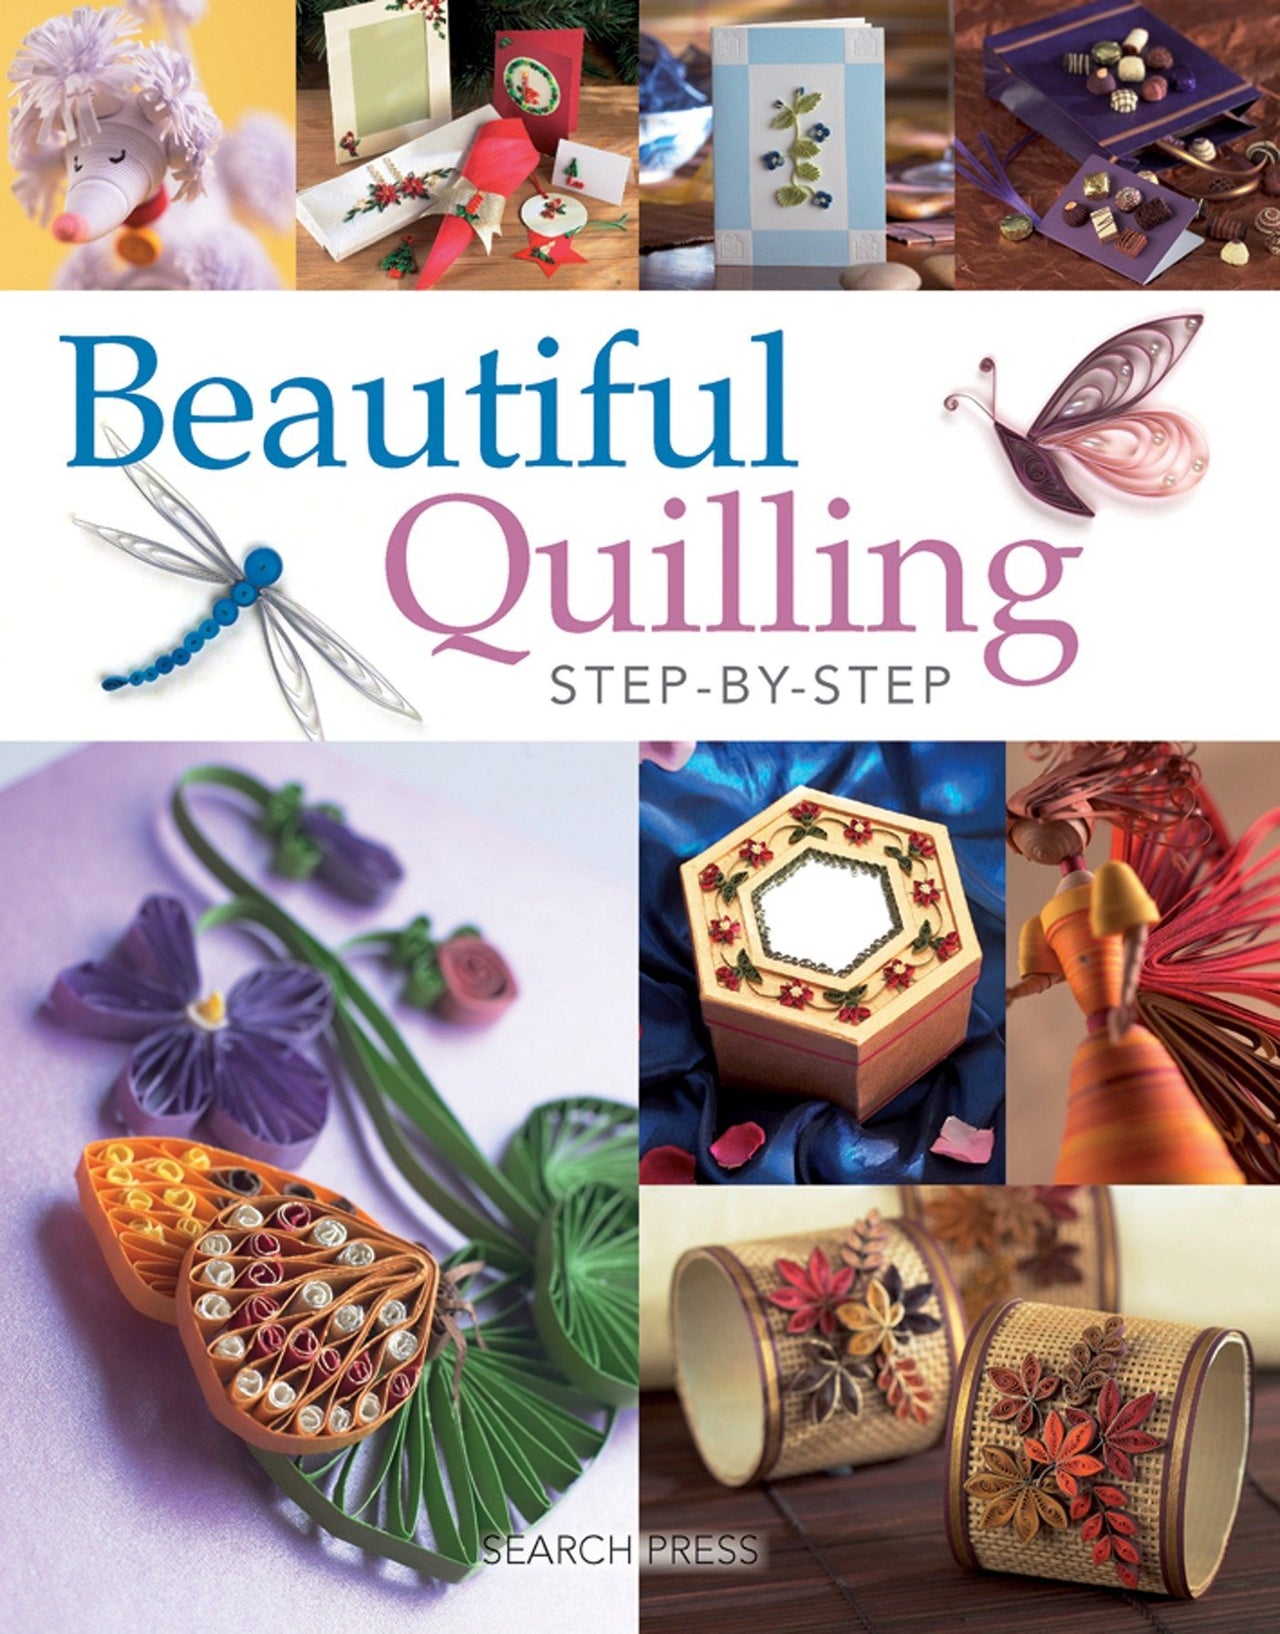 Beautiful Quilling Step-by-Step - Jenkins, Jane, et al, - New